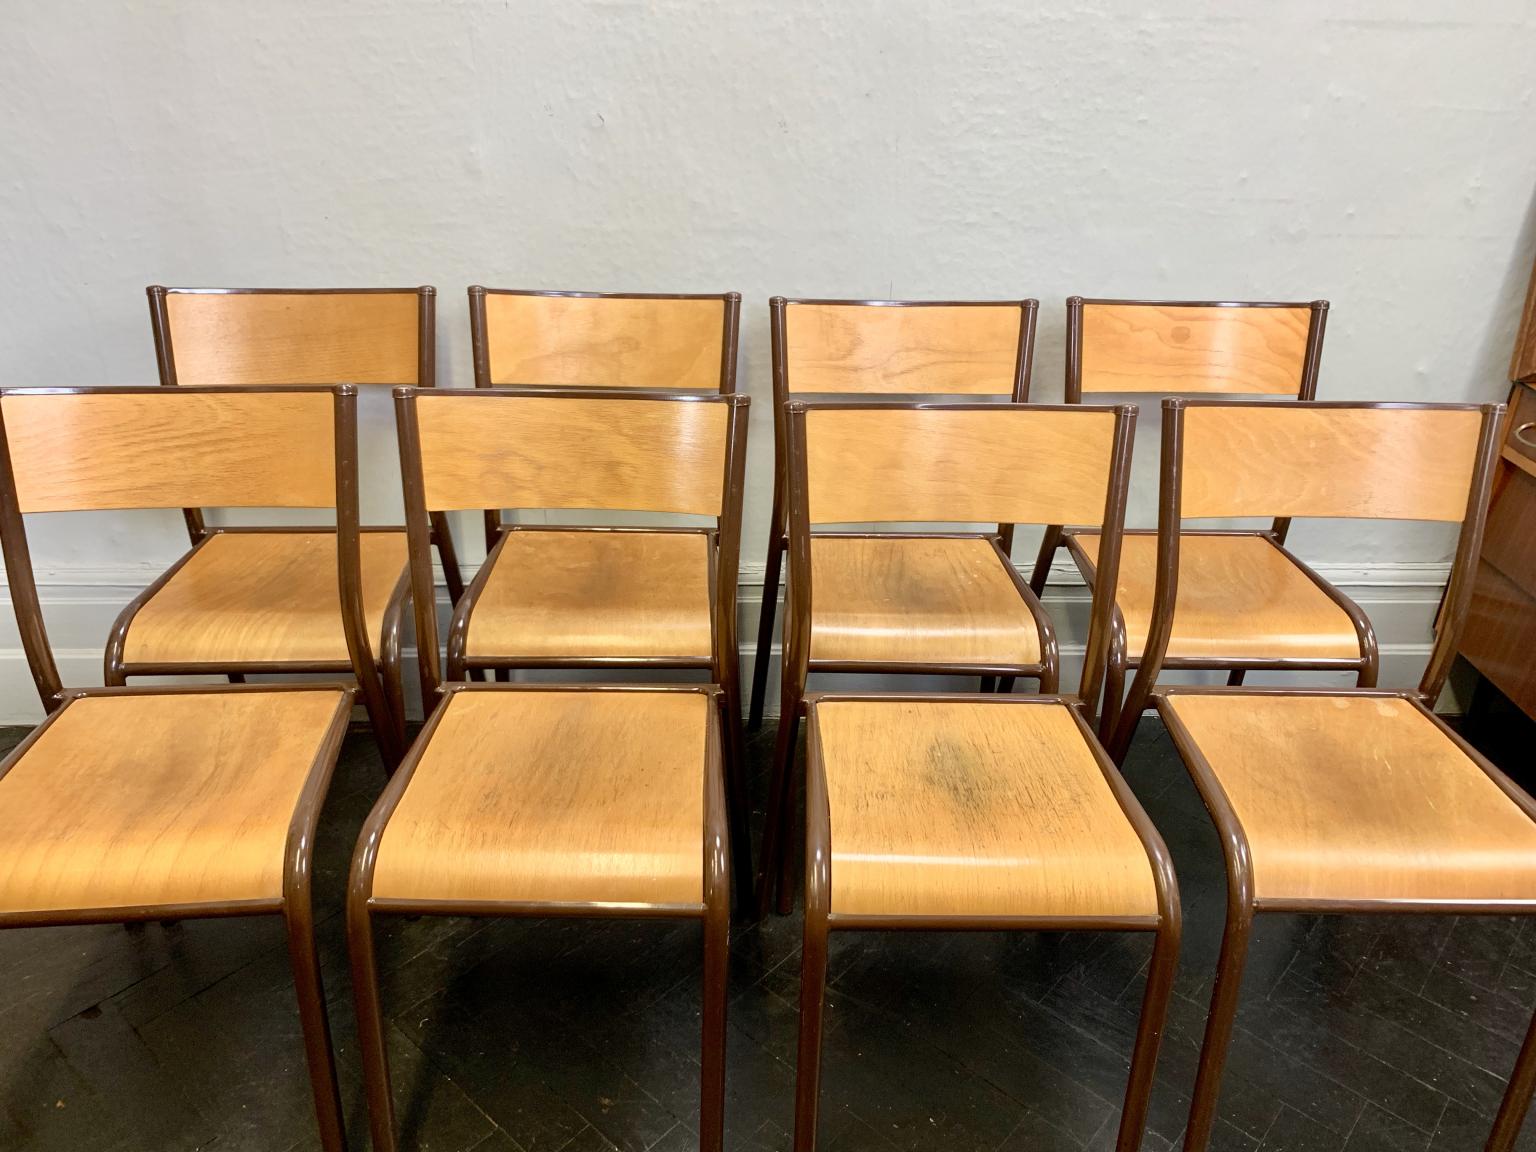 Vintage School Desk Chairs Stacking French In E3 London Fur 40 00